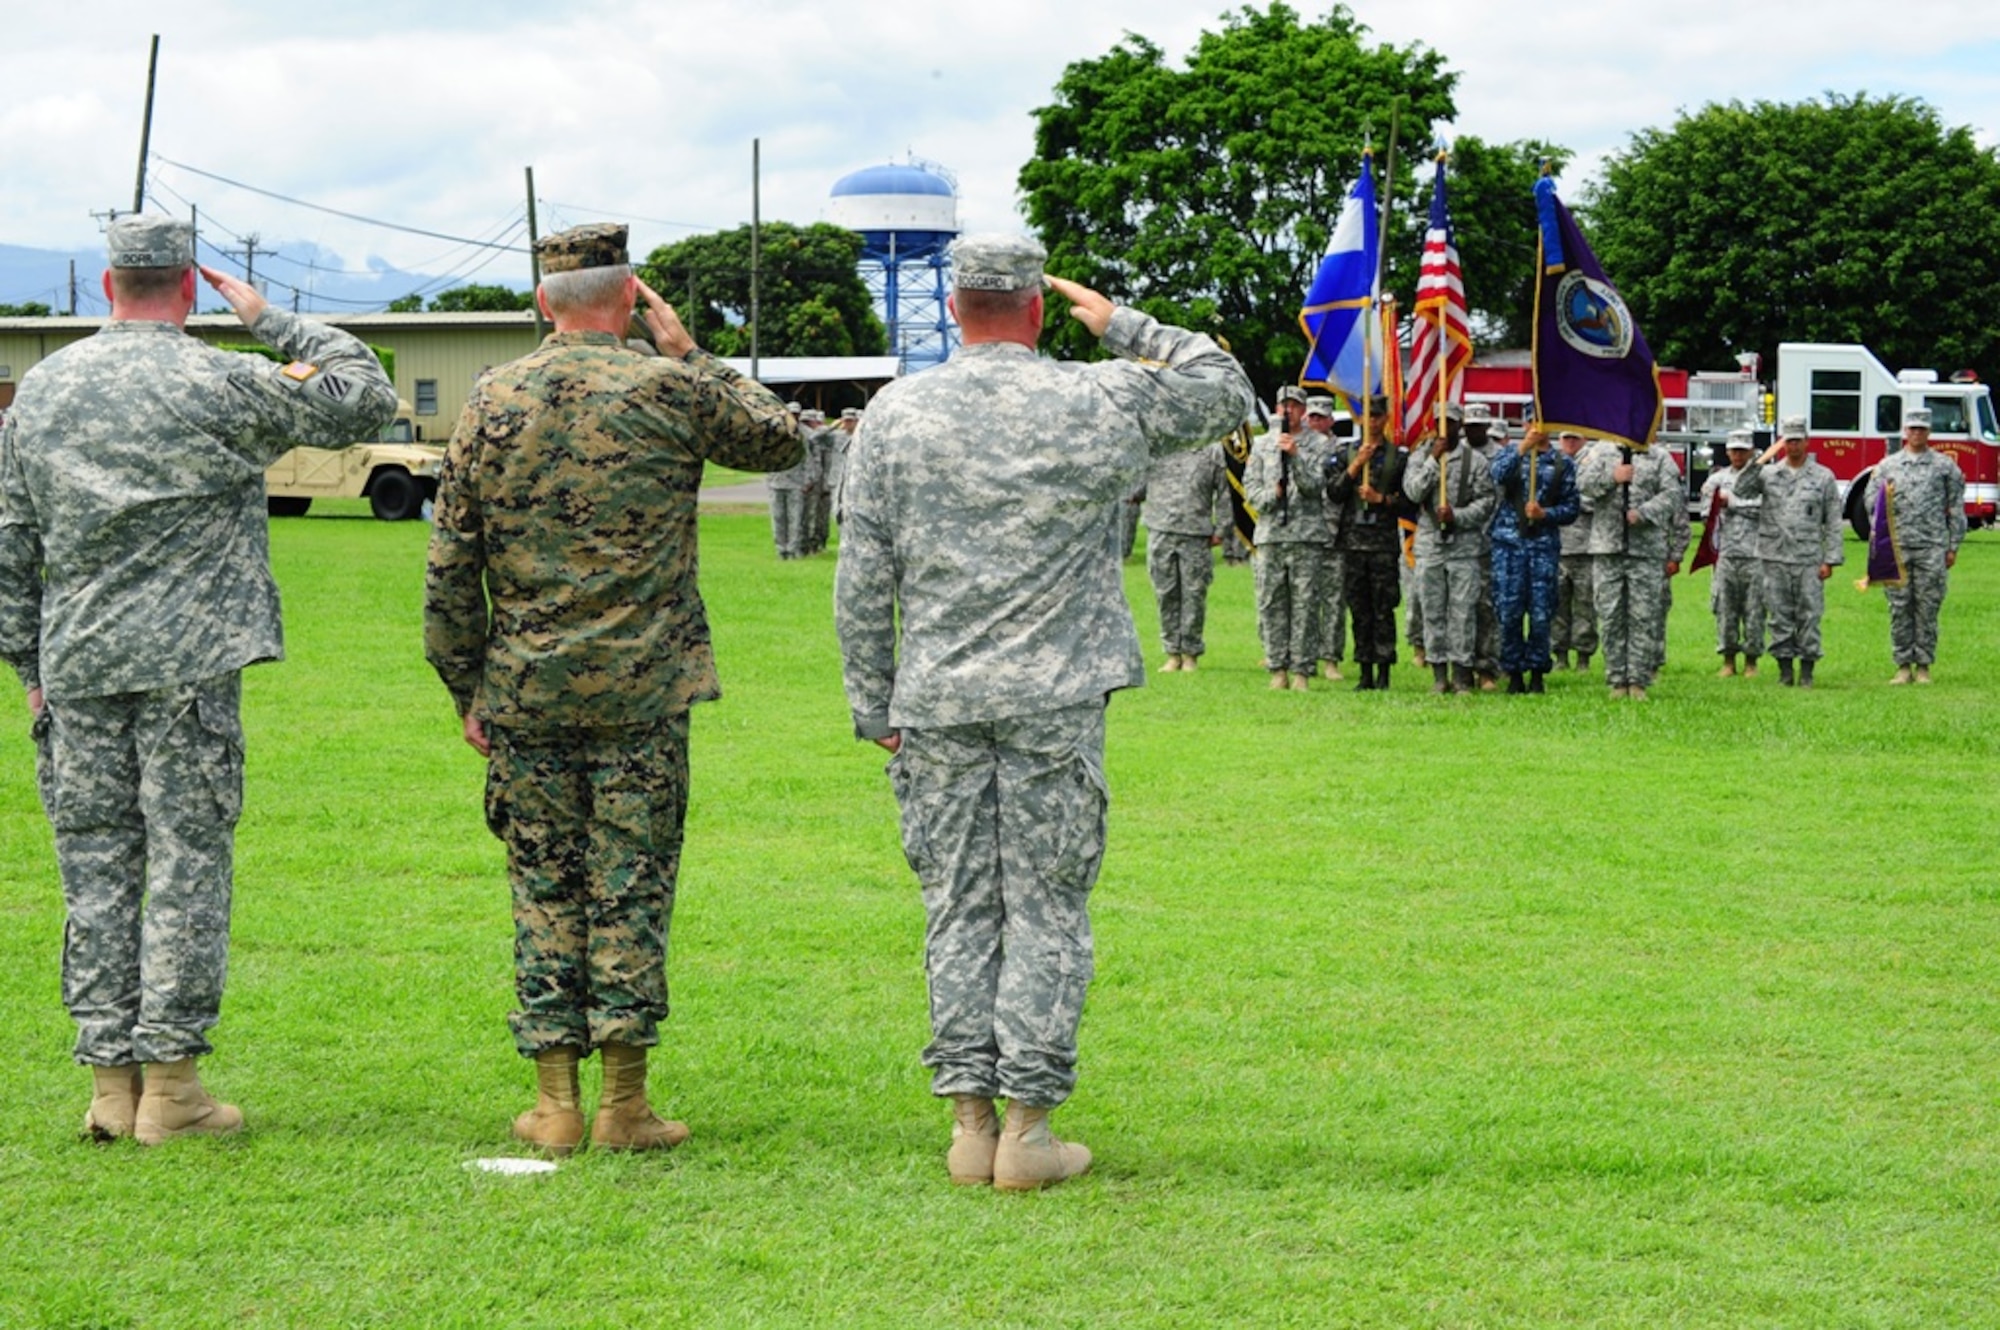 U. S. Army Col. Kirk C. Dorr (left), U. S. Marine Gen. John F. Kelly, U. S. Southern Command commander, and U. S. Army Col. Thomas D. Boccardi salute the Honduras and American flag during the Joint Task Force-Bravo change of command ceremony at Soto Cano Air Base, Honduras, June 23, 2014. Col. Dorr assumed command from Col. Boccardi.  (Photo by U. S. Air National Guard Capt. Steven Stubbs)